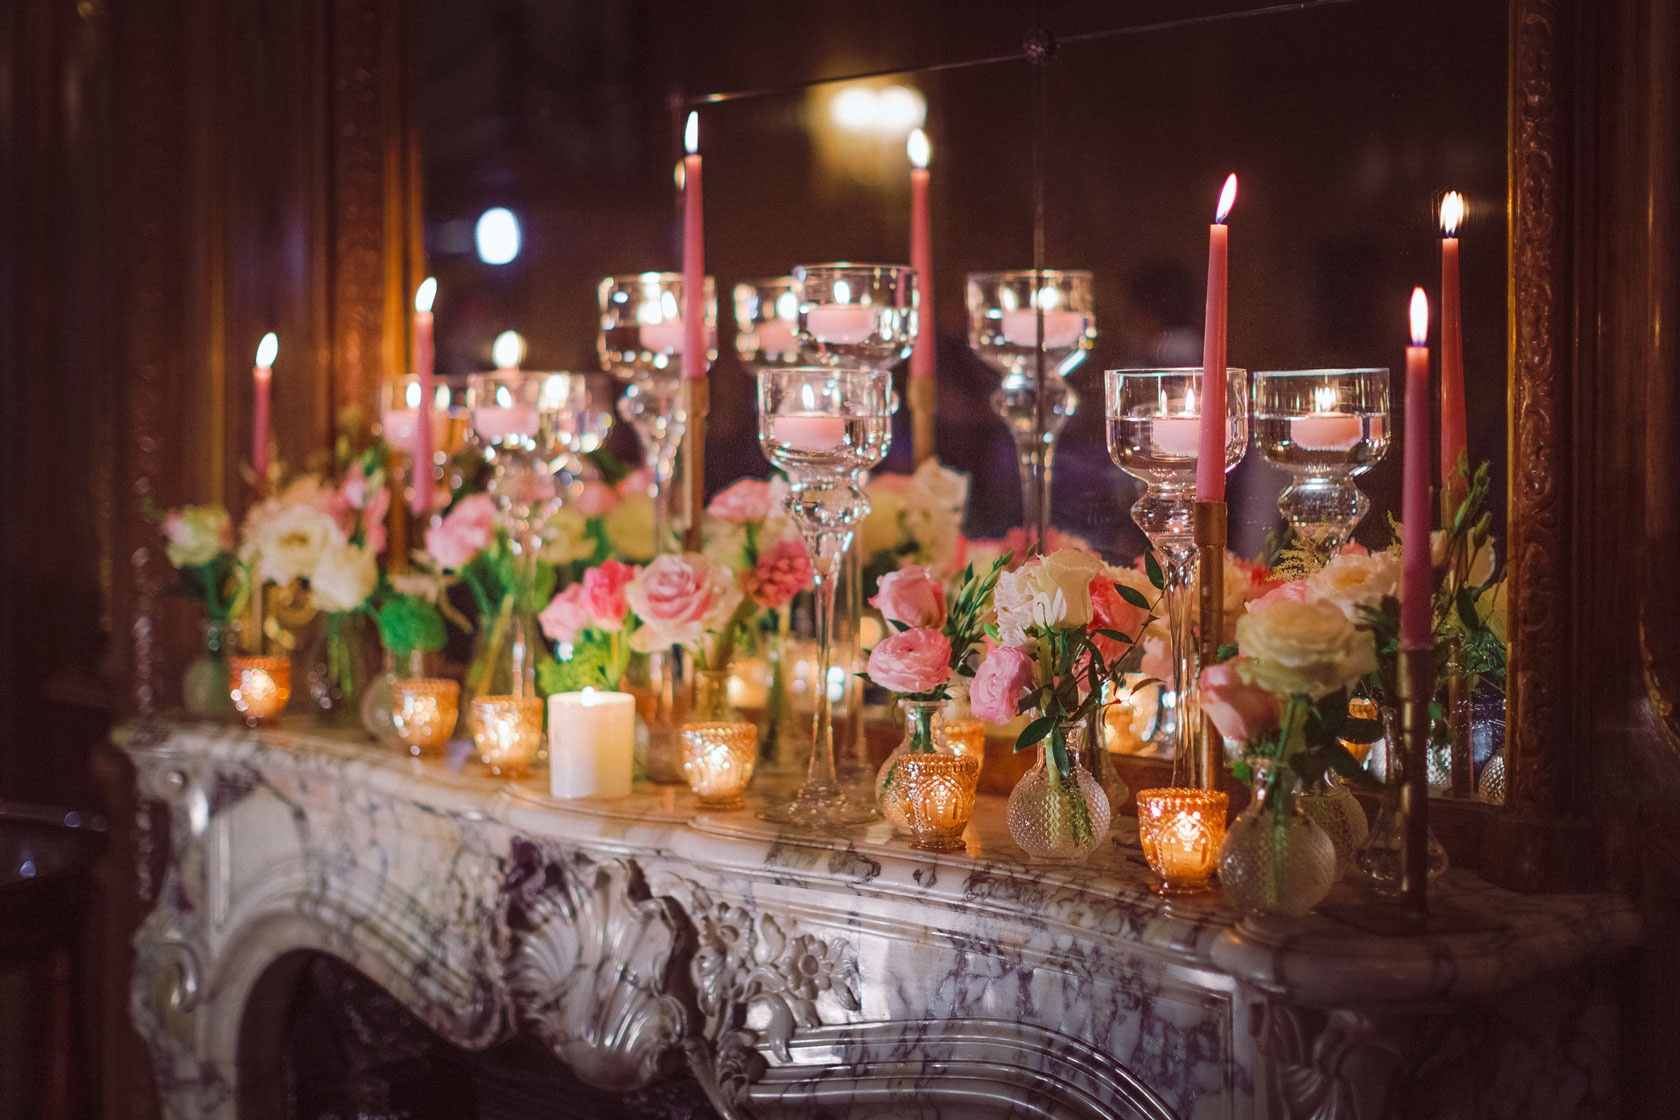 marble mantelpiece inside Claridges decorated with flowers in glass vases and lit candles for a wedding